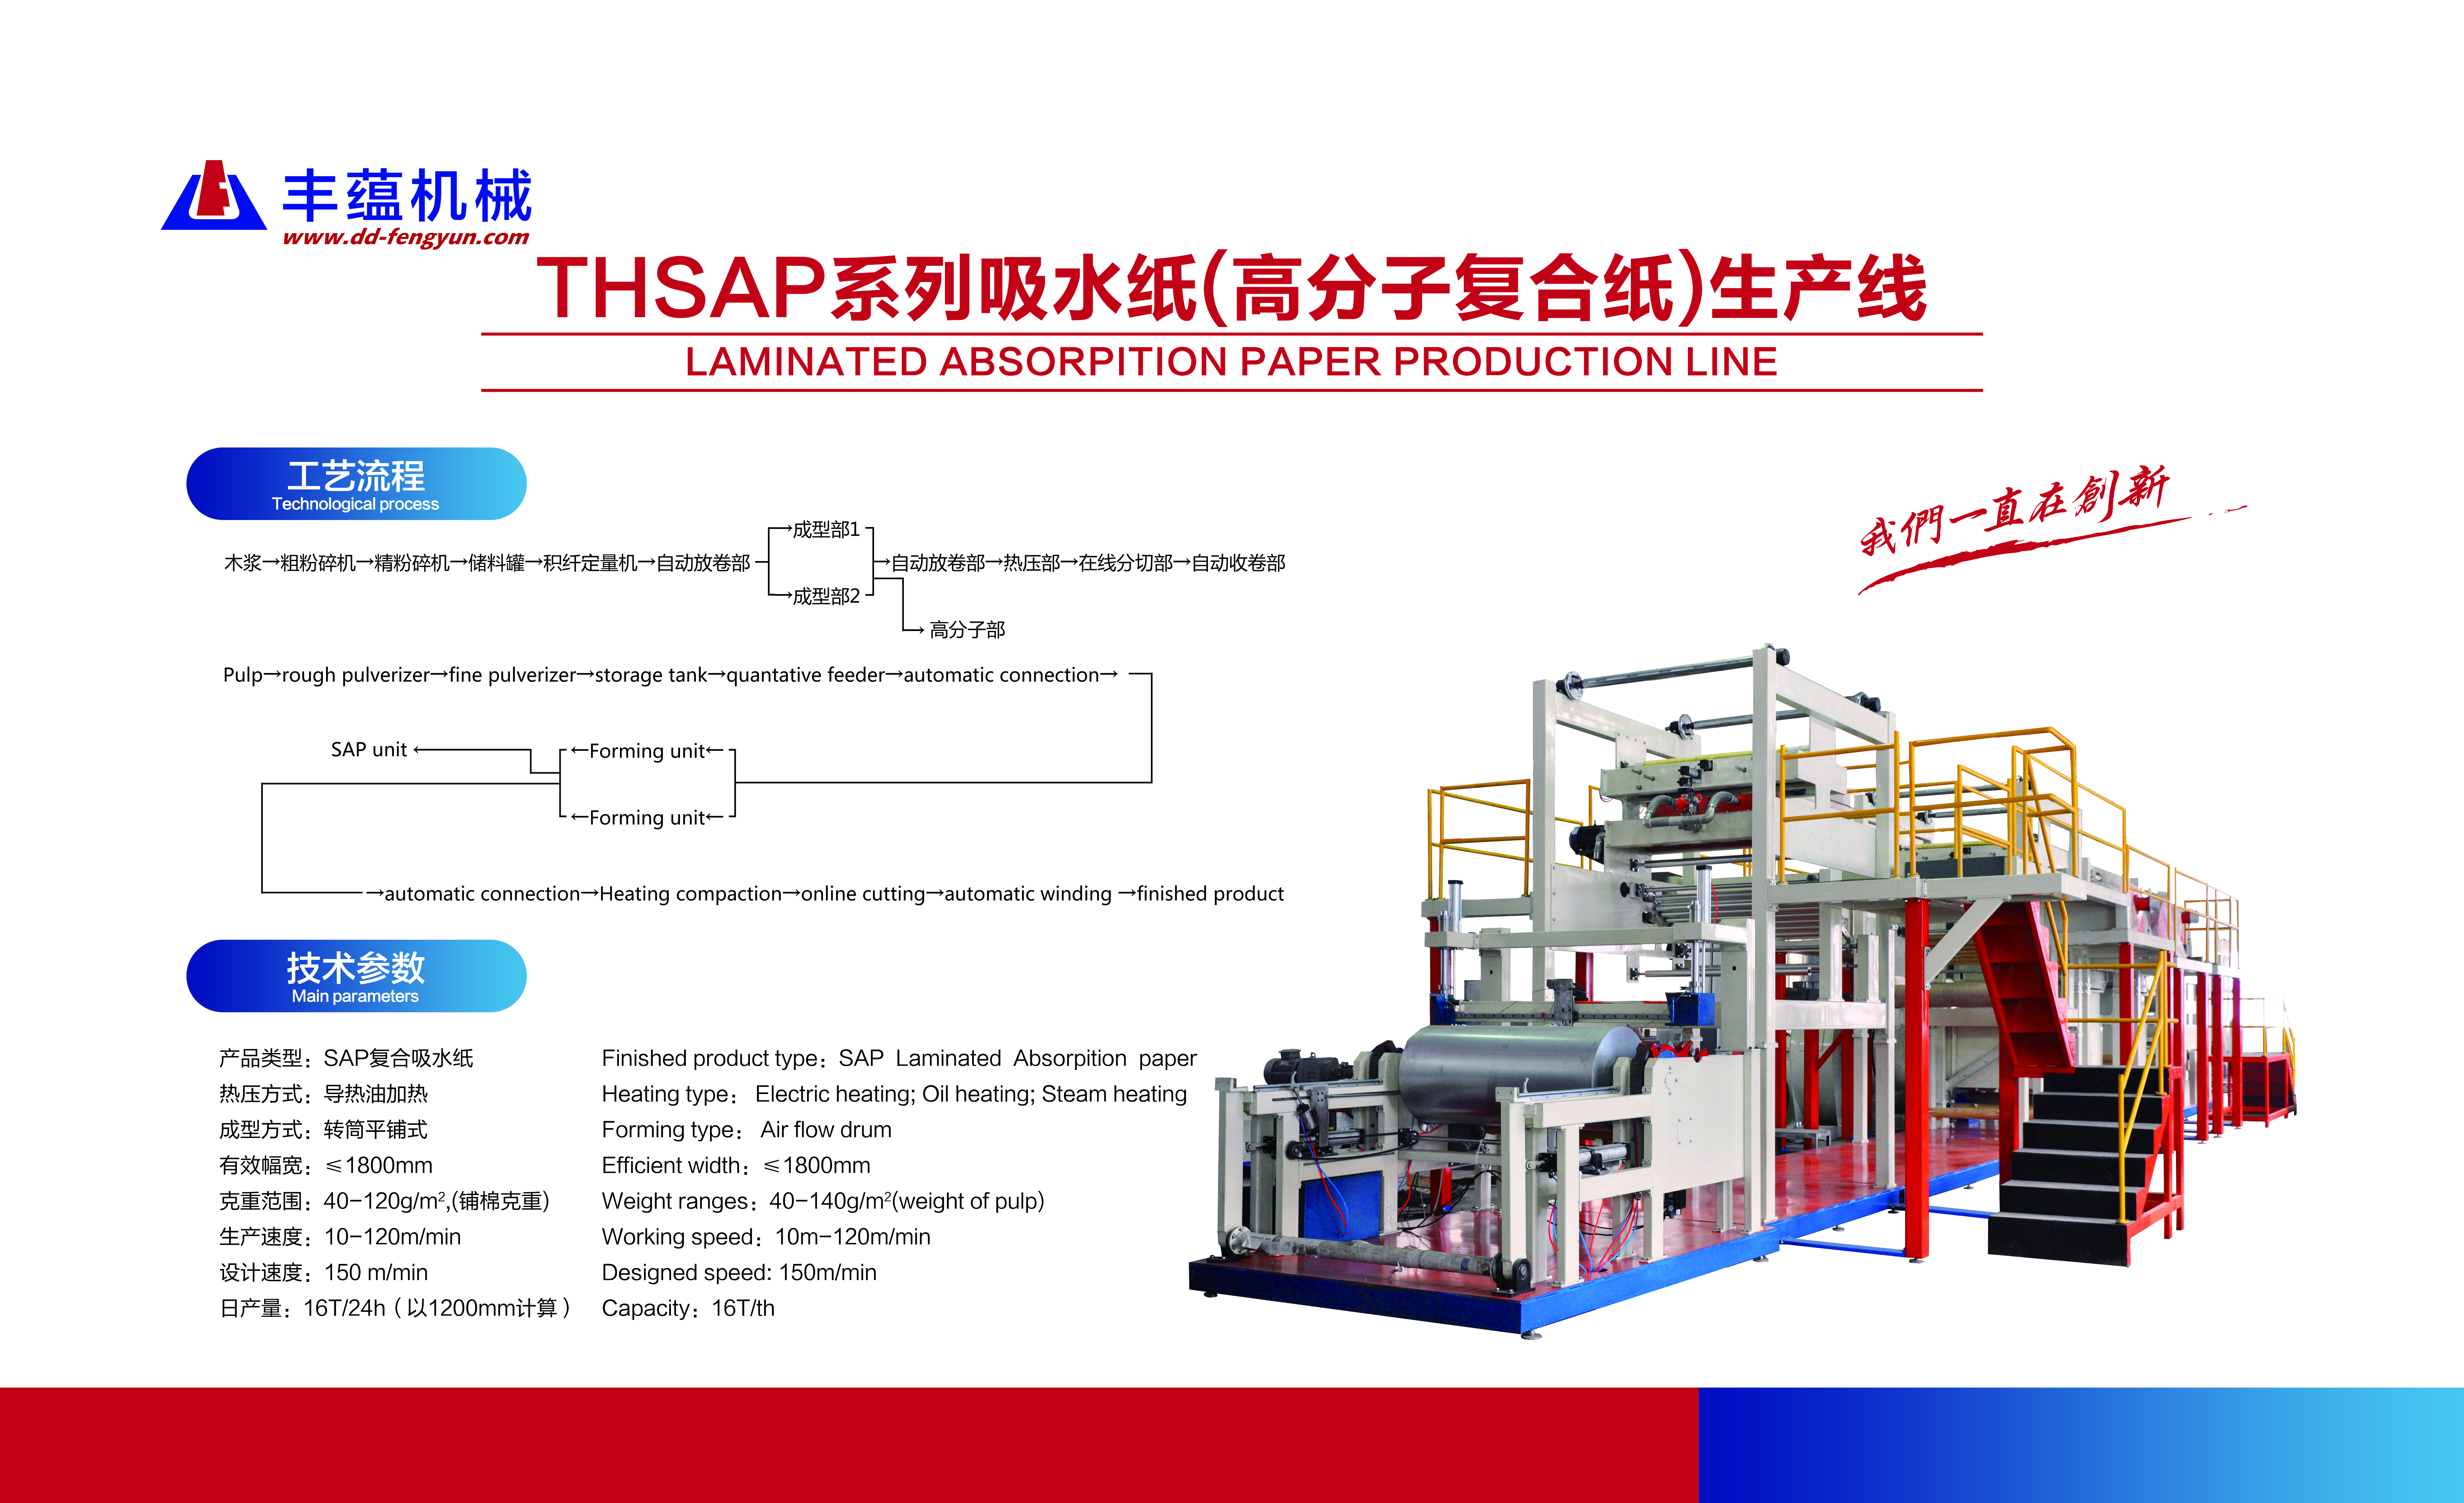 Laminated  Absorption  paper  production  line